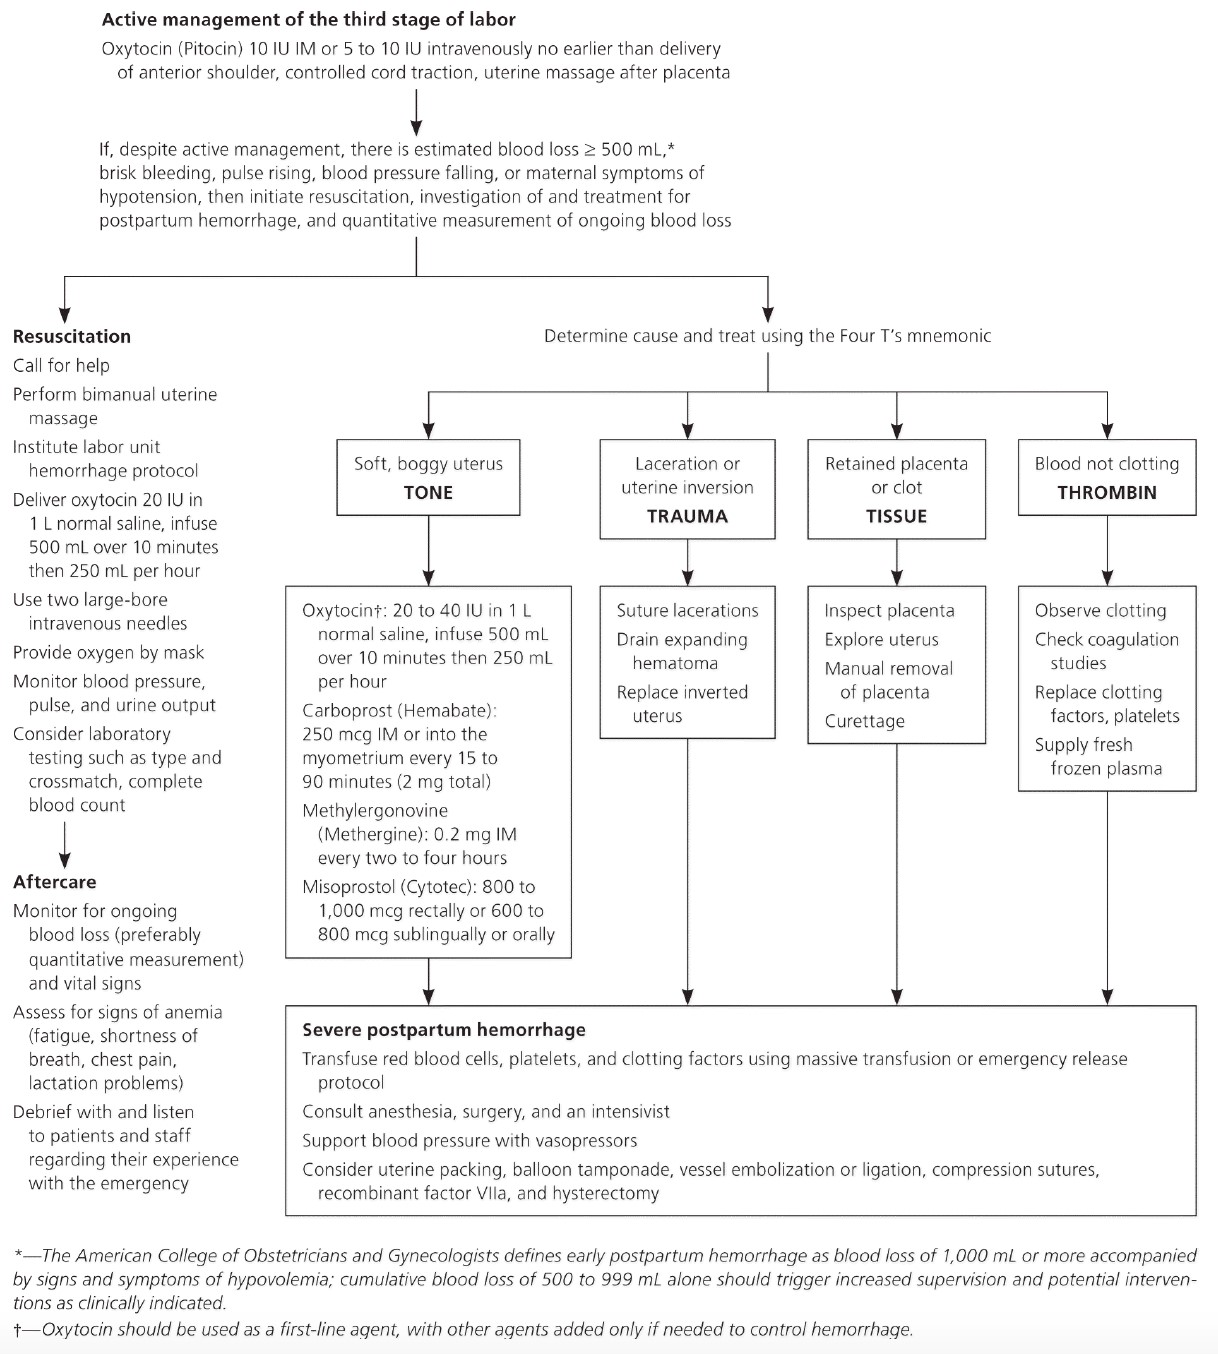 literature review physiological management for preventing postpartum hemorrhage